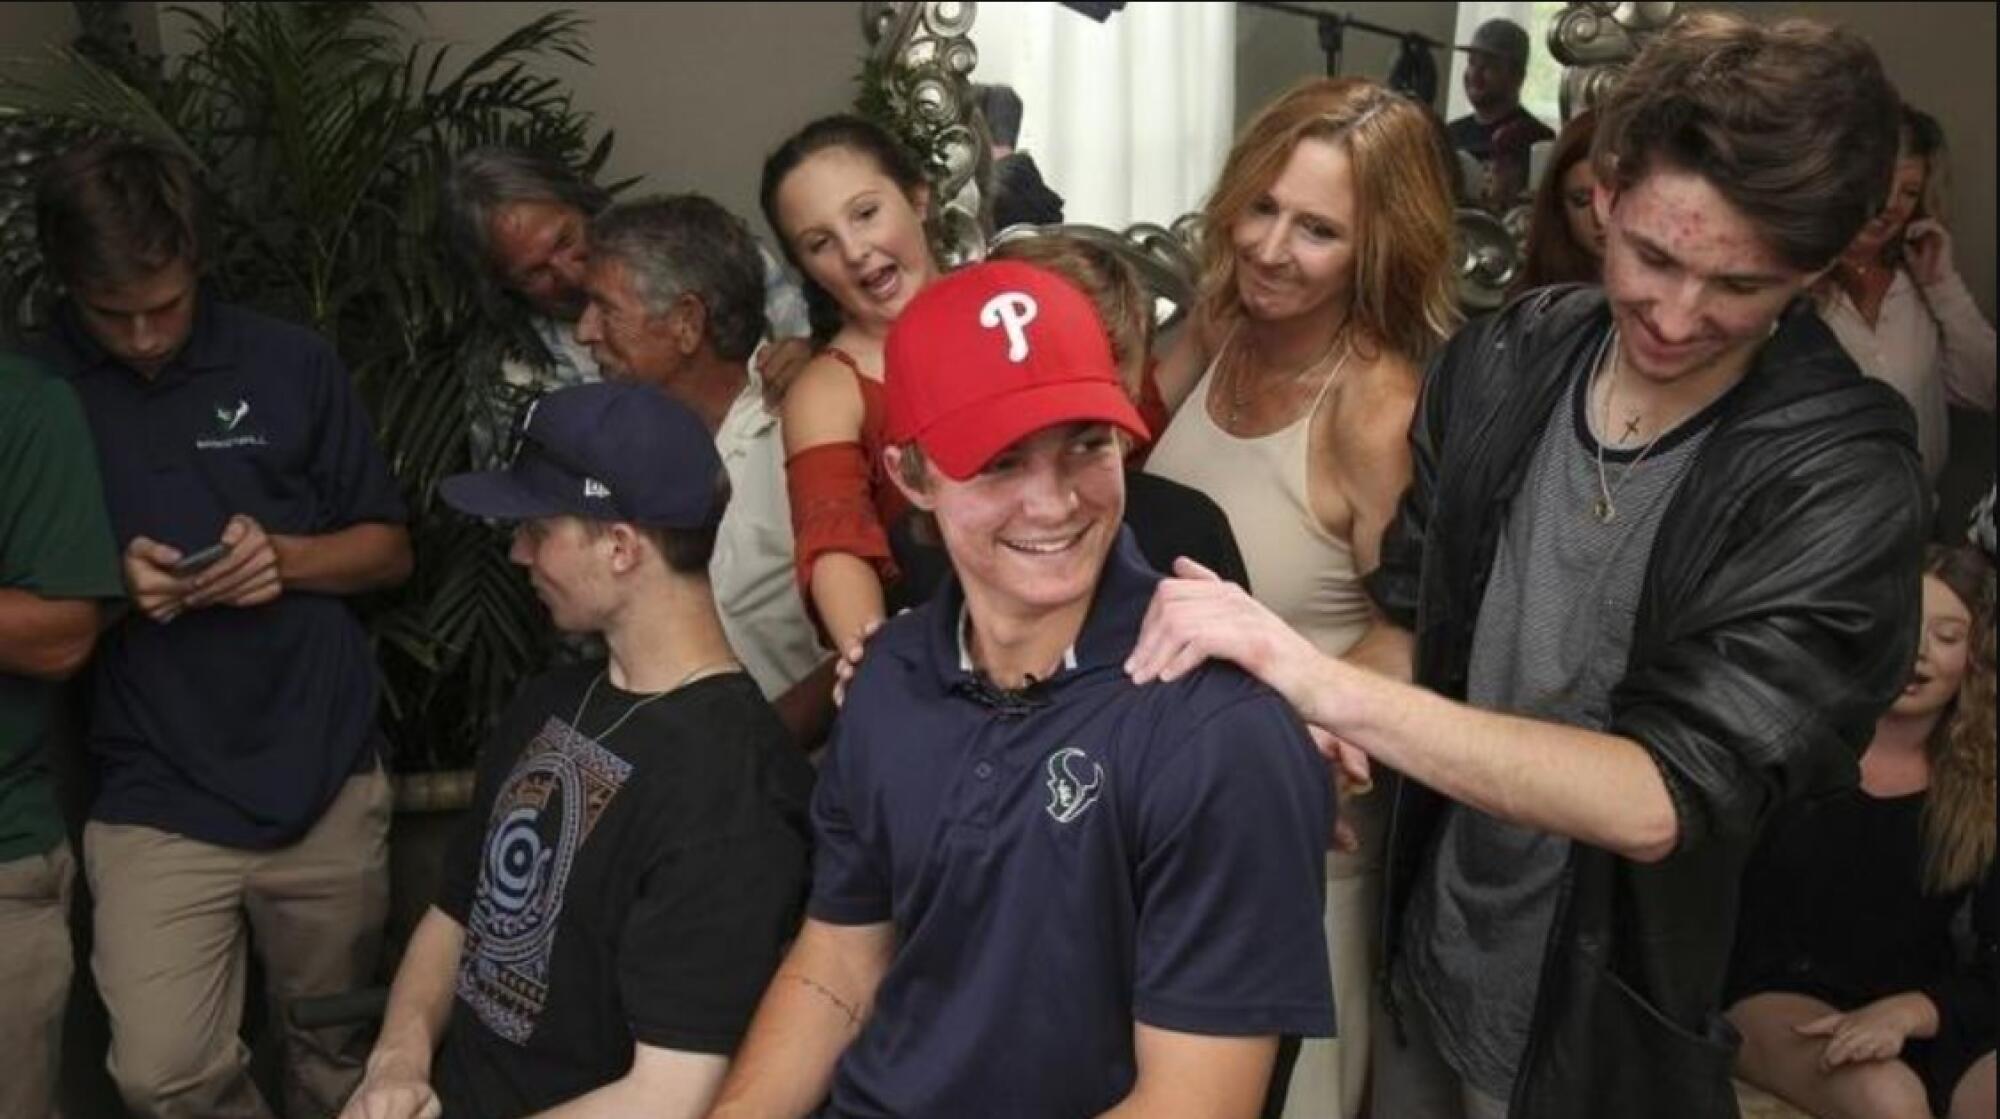 The Phillies made Mickey Moniak the No,. 1 overall pick in the draft.